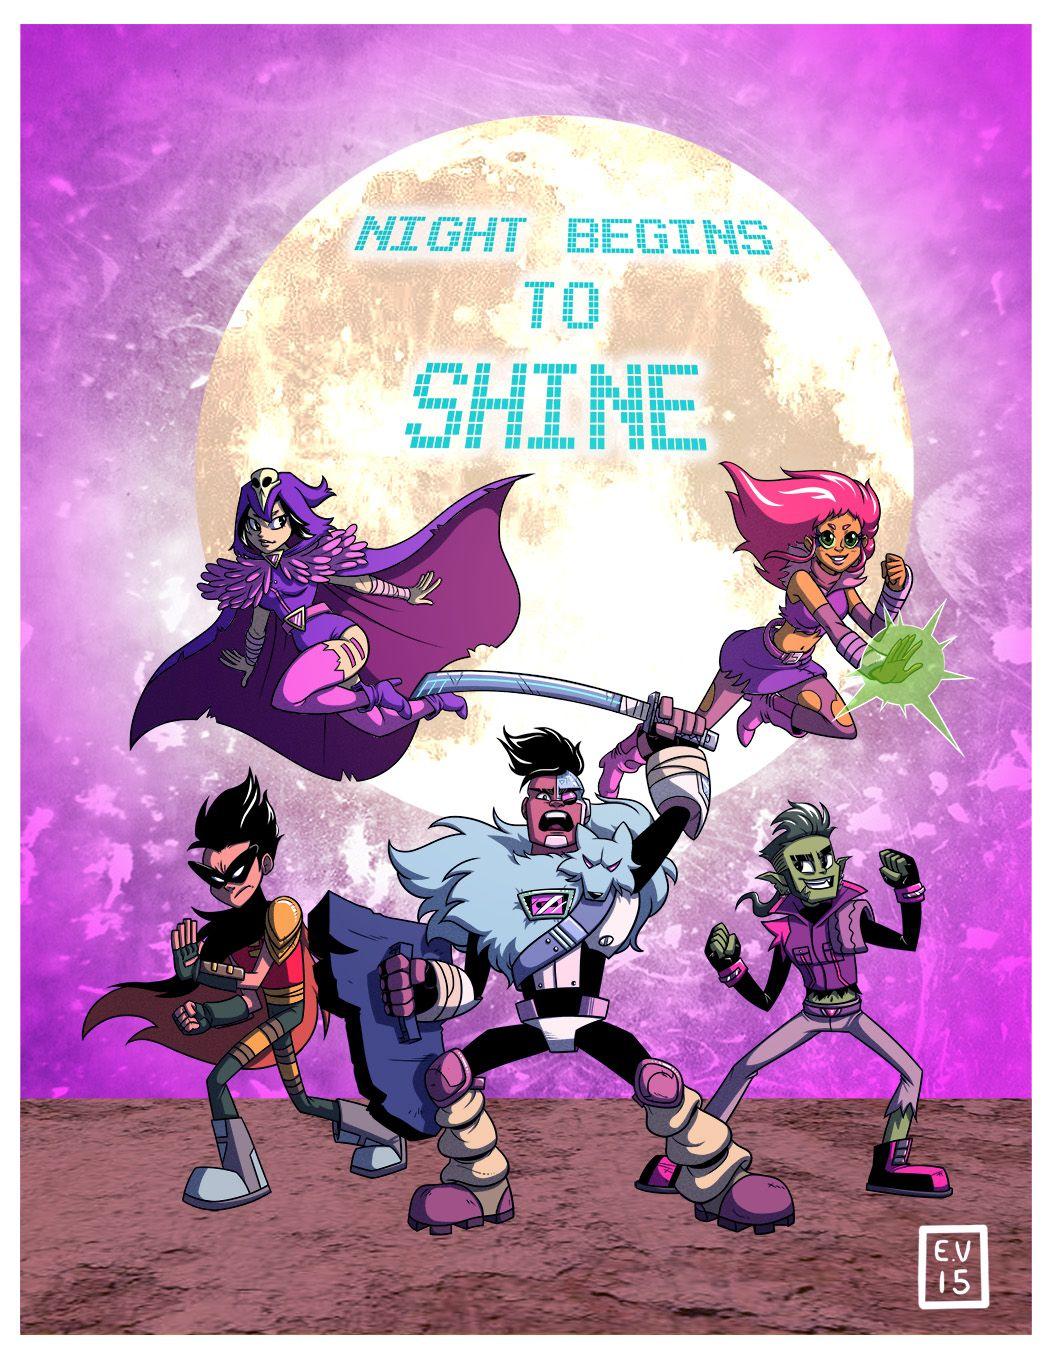 What Song Is The Night Begins To Shine Based On - roblox song code the night begins to shine